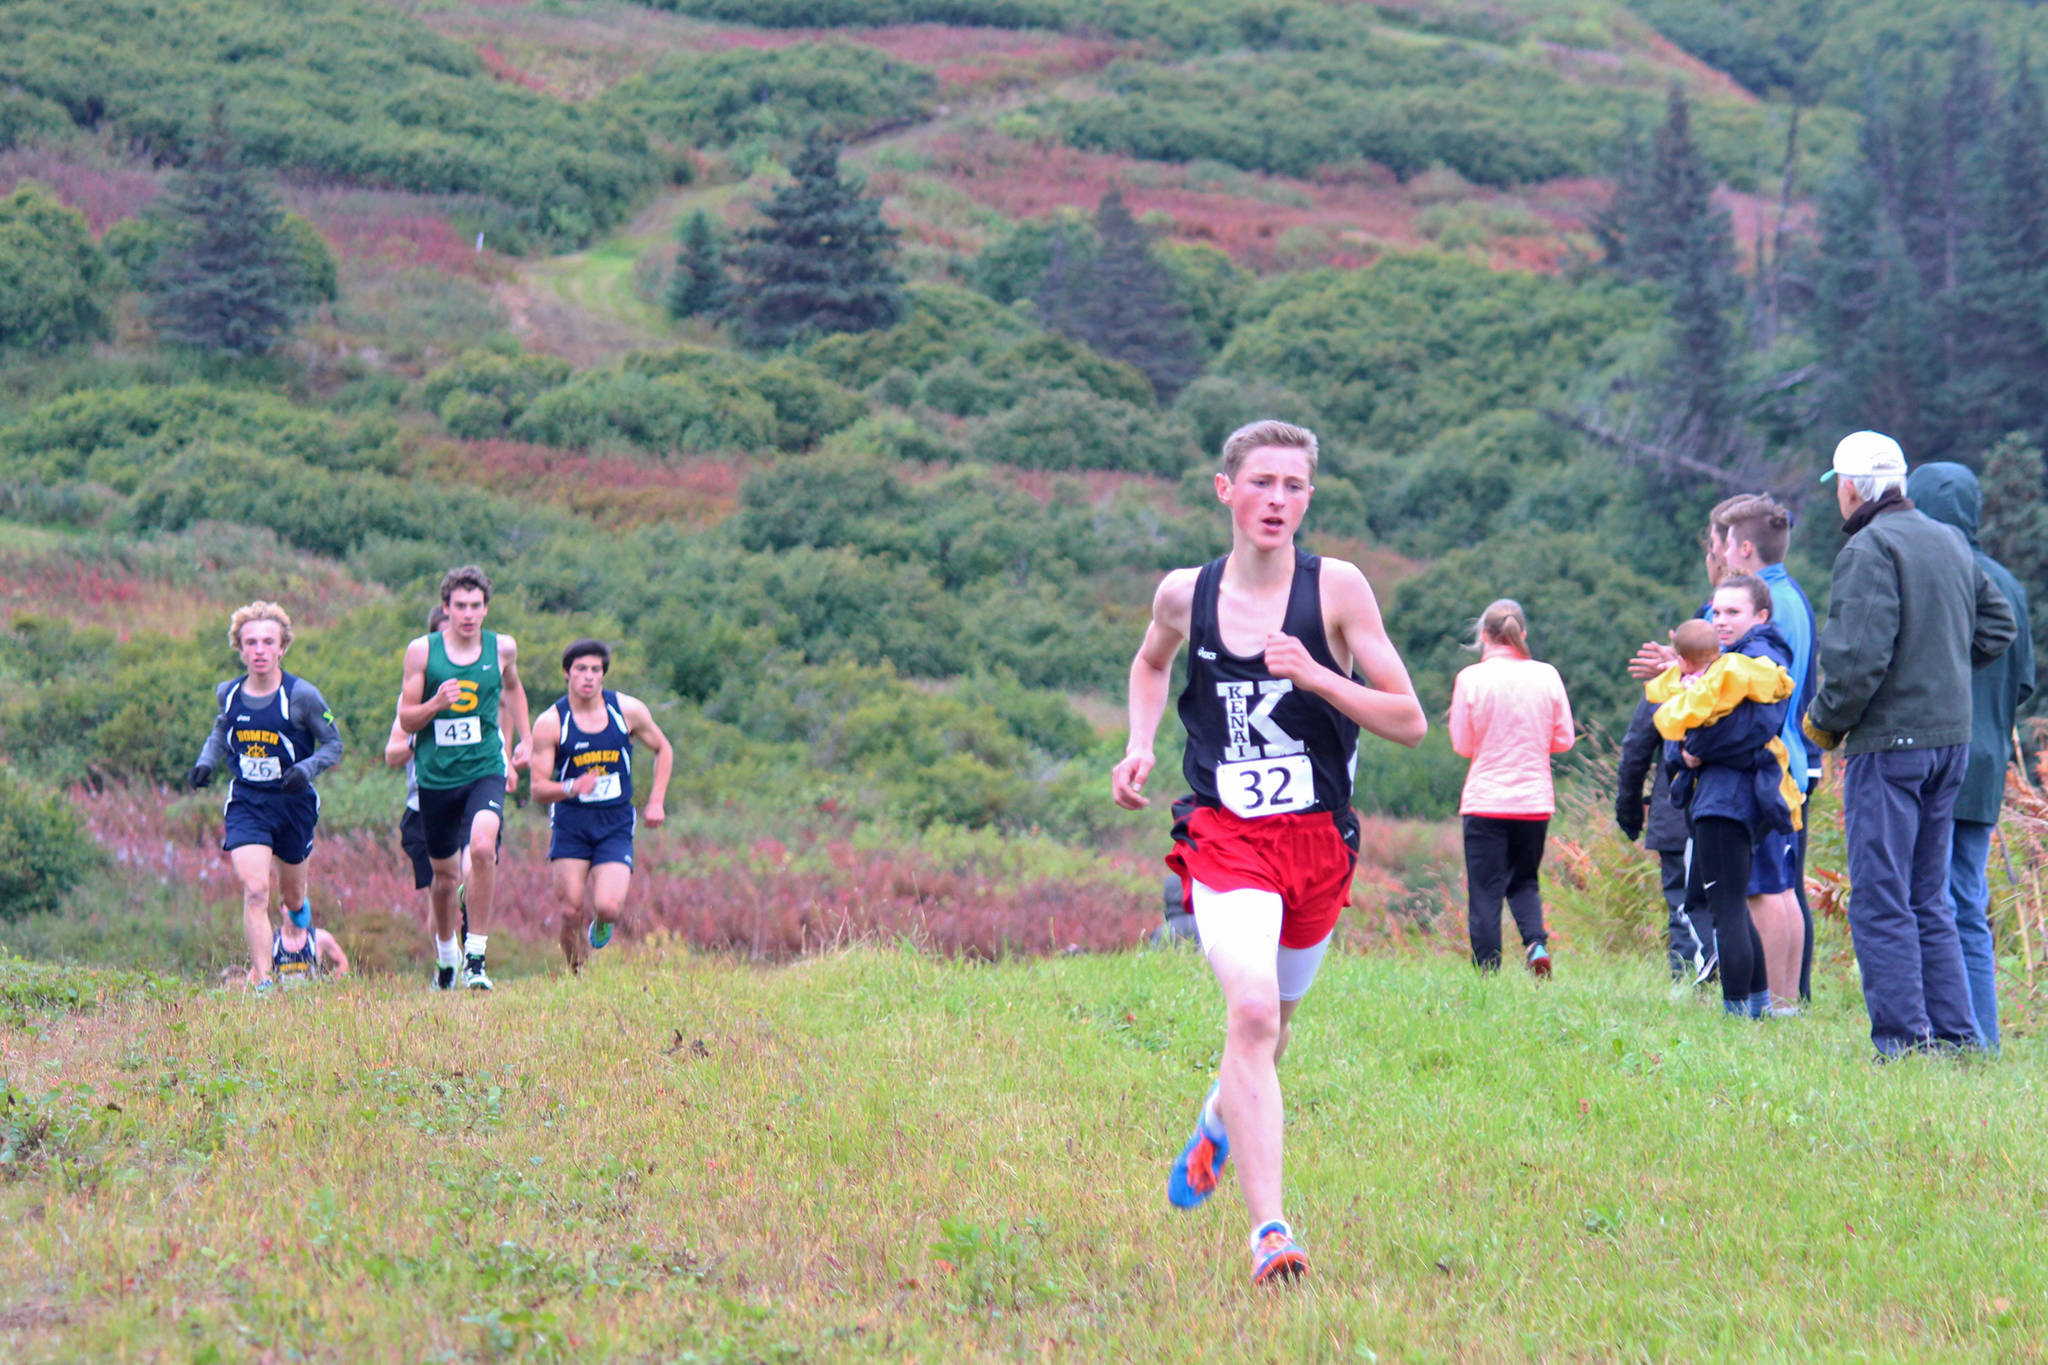 Kenai Central High School runner Maison Dunham pulls ahead of the pack nearing the end of the varsity boys race at the Kenai Peninsula Borough Cross Country Running Championships on Tuesday, Sept. 12, 2017 at the Lookout Mountain Trails near Homer, Alaska. Soldotna High School took first overall out of the varsity boys teams, and the Kenai team claimed the top spot for the girls. (Photo by Megan Pacer/Homer News)